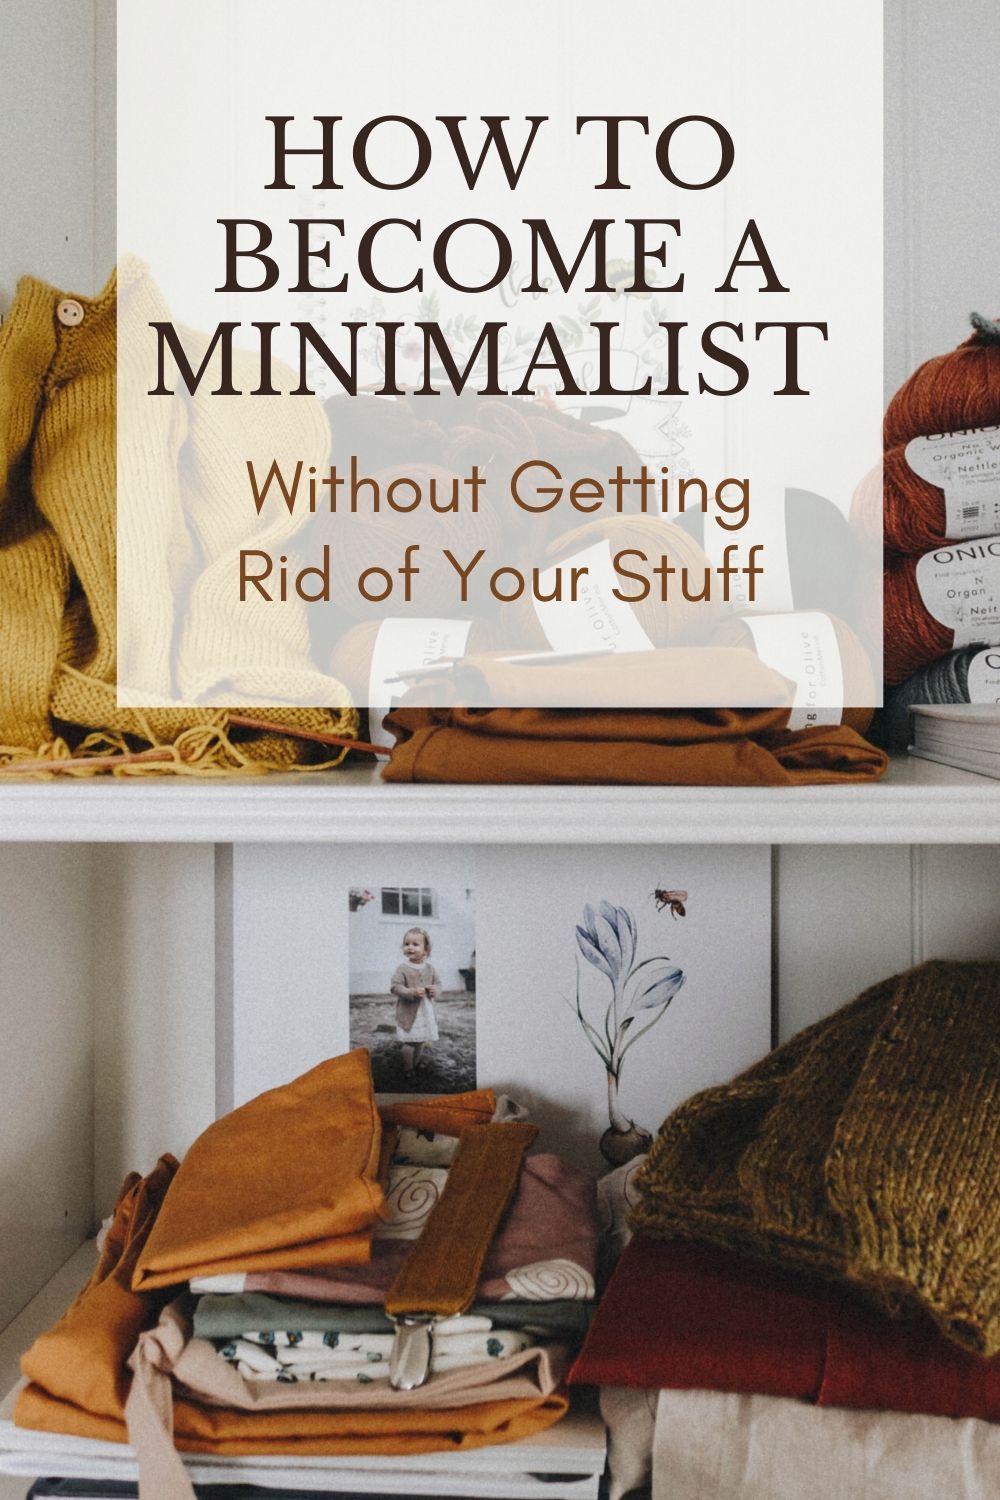 “Less is More: Embracing Minimalism and Decluttering for a Sustainable Future”